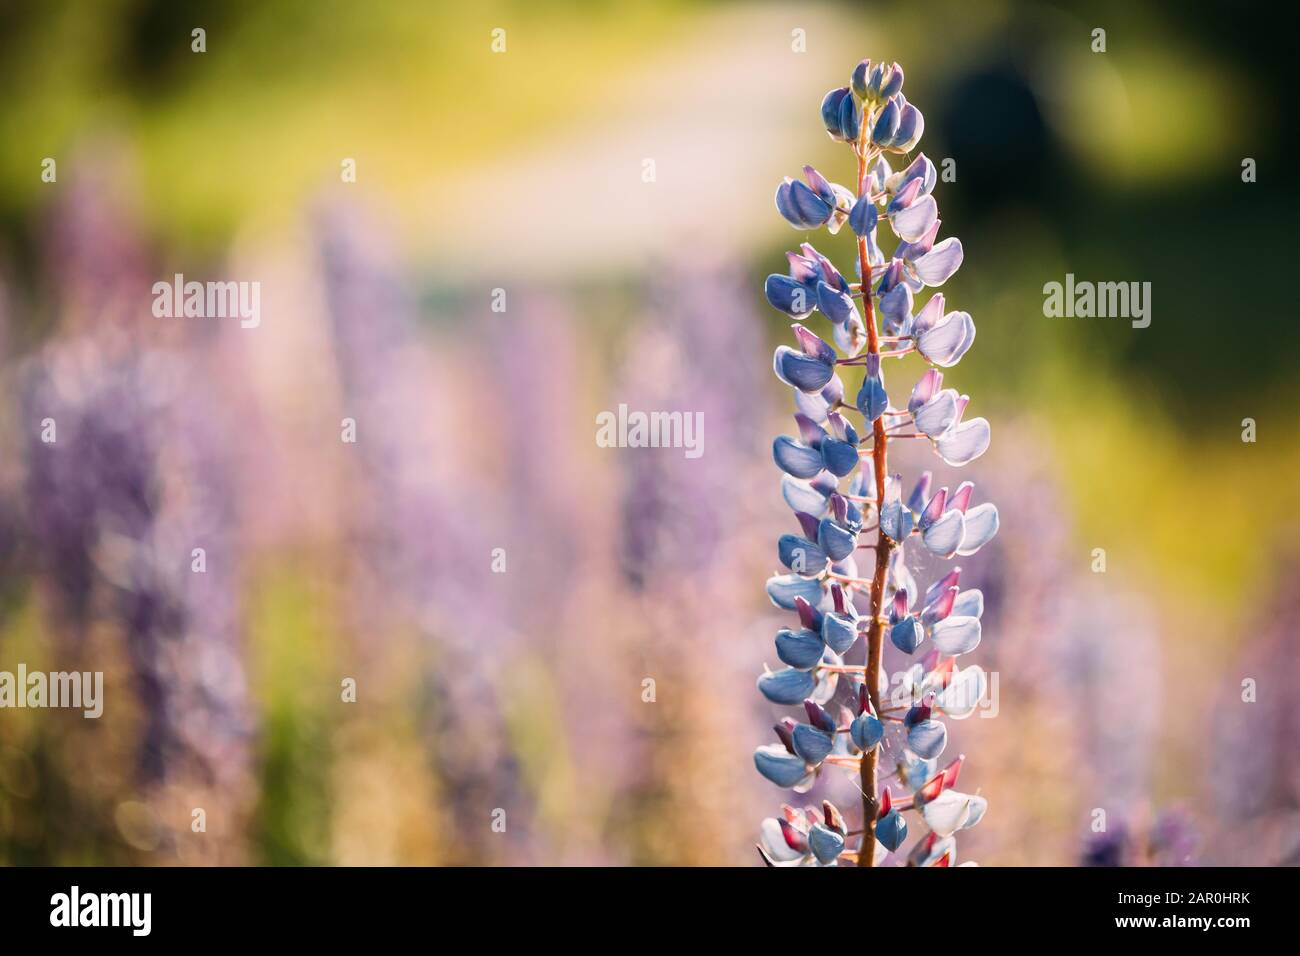 Bush Of Wild Flowers Lupine In Summer Field Meadow At Sunset Sunrise. Lupinus, Commonly Known As Lupin Or Lupine, Is A Genus Of Flowering Plants In Th Stock Photo